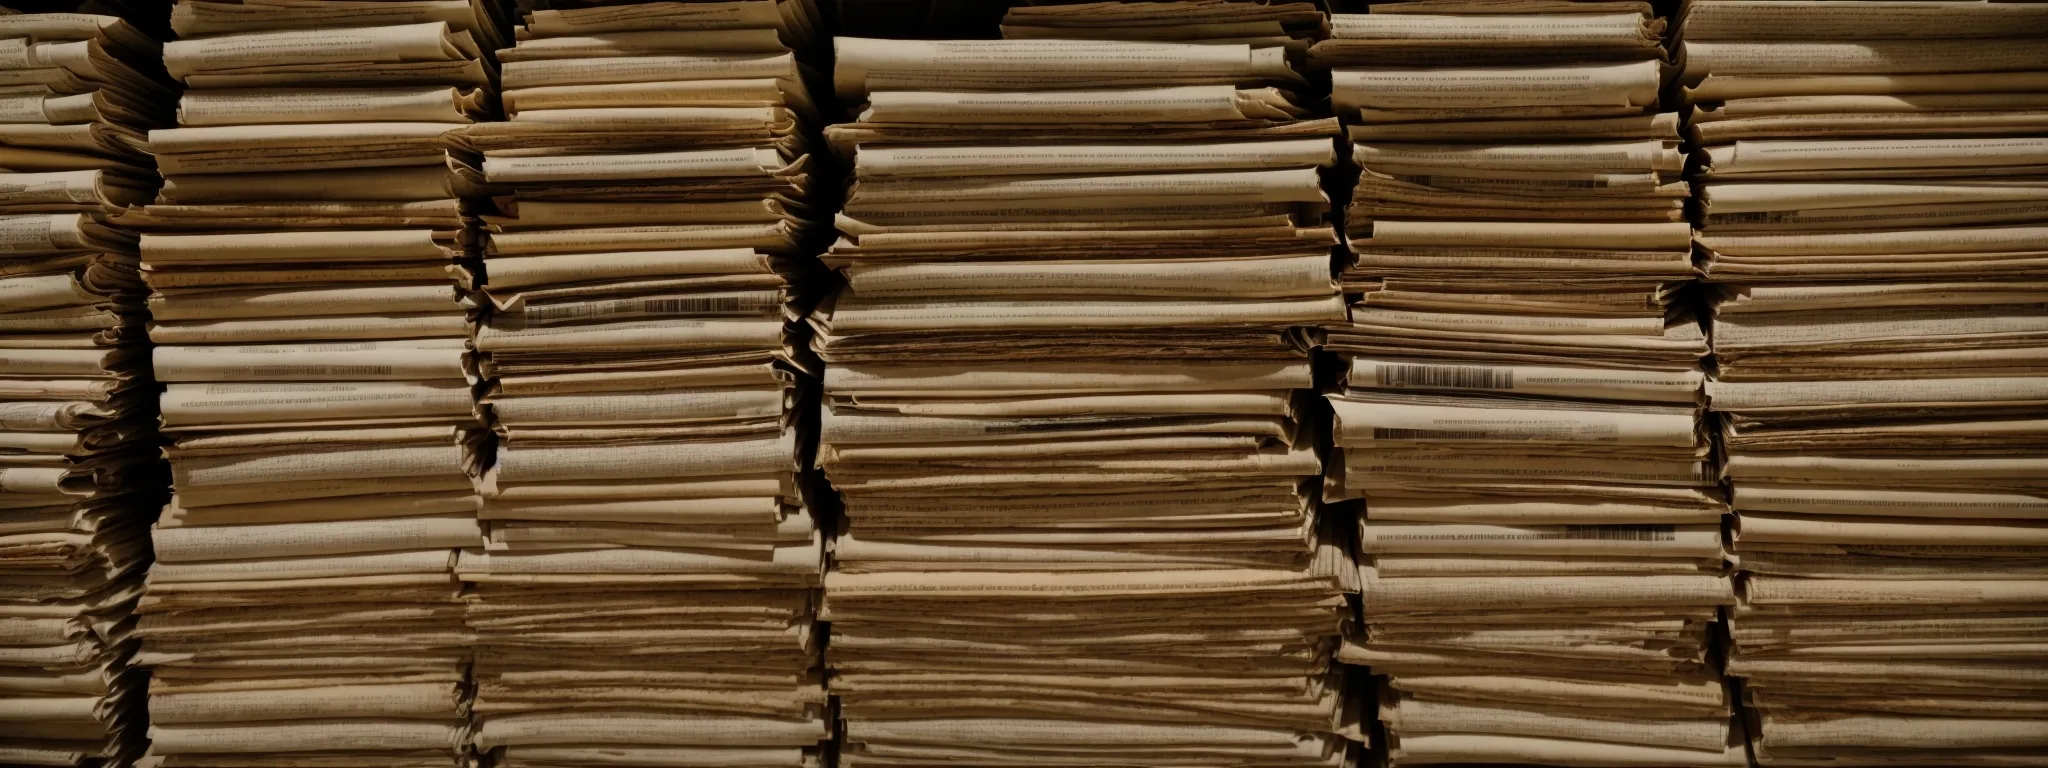 stacks of old, yellowed newspapers piled up in a corner, showcasing dated information.